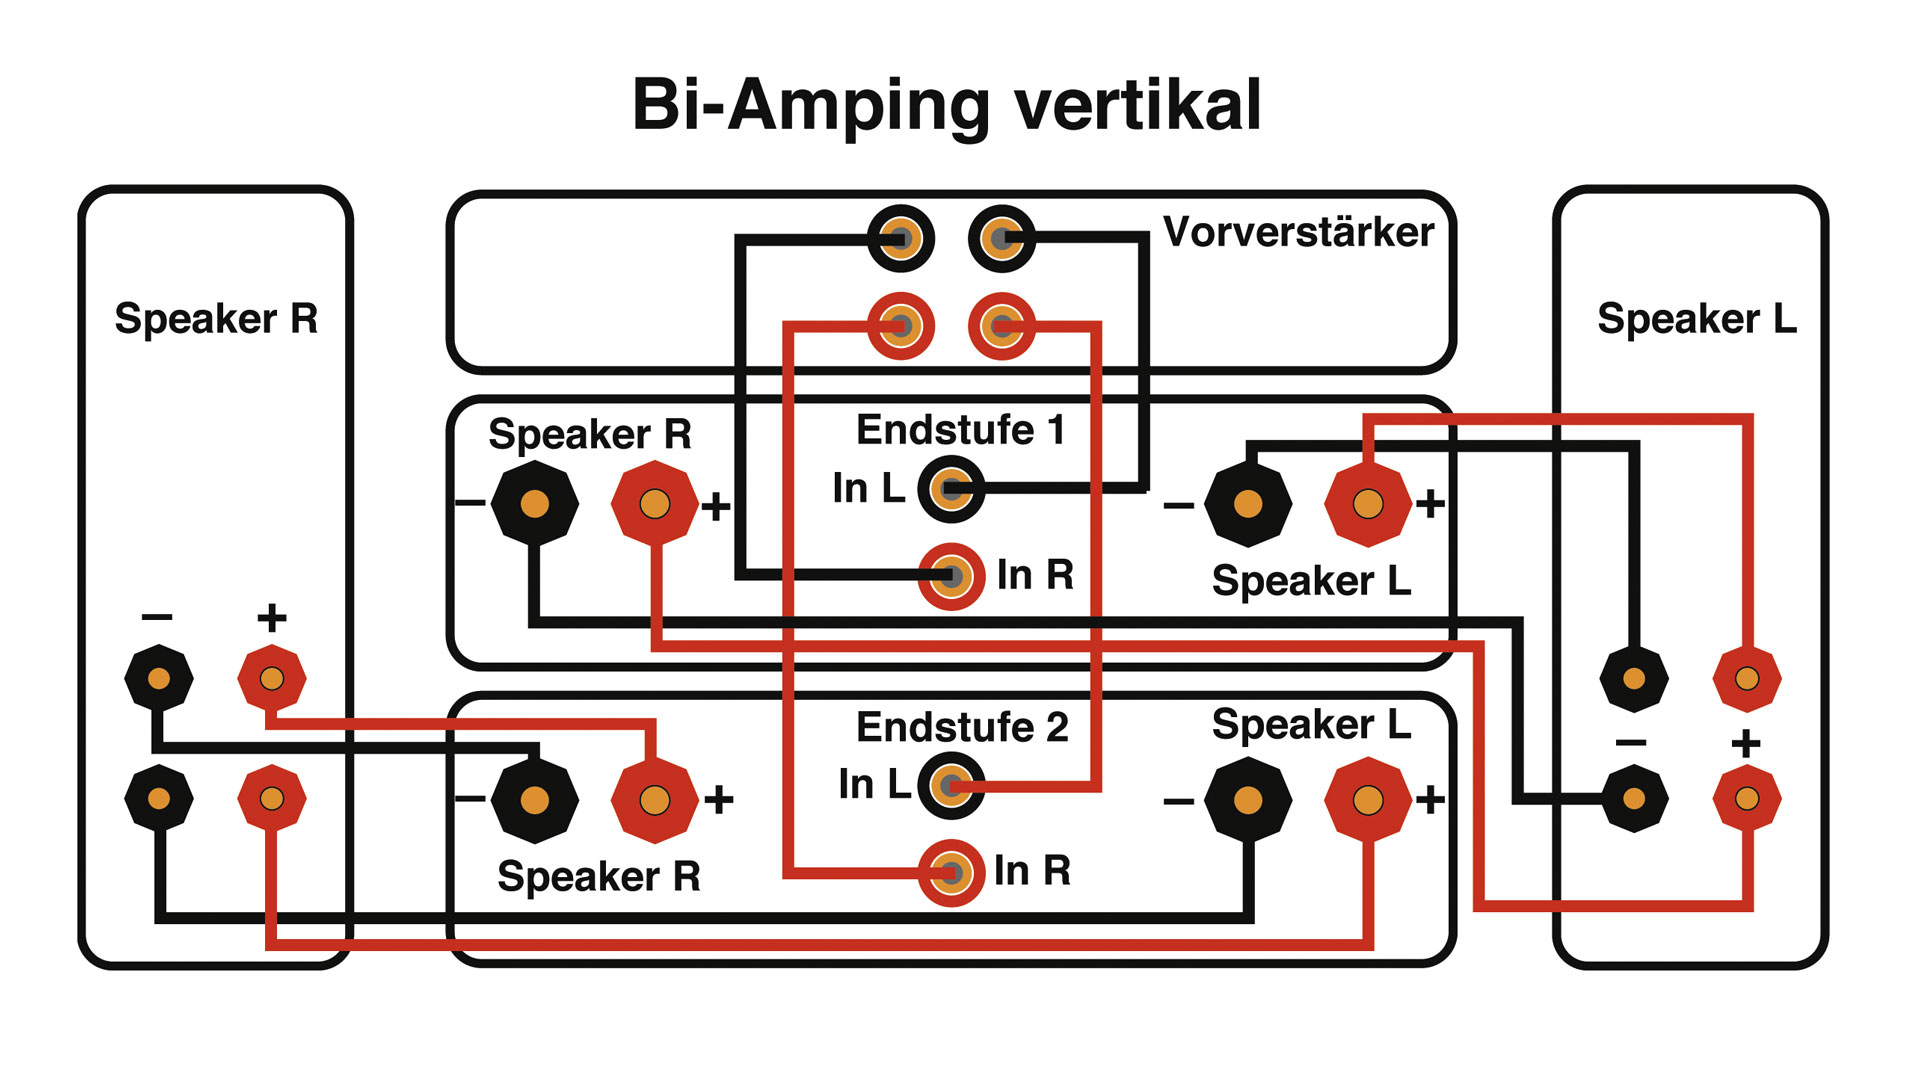 Bi-Wiring vs Bi-Amping: How to Up the Ante of Your Listening Experience -  Polk Audio